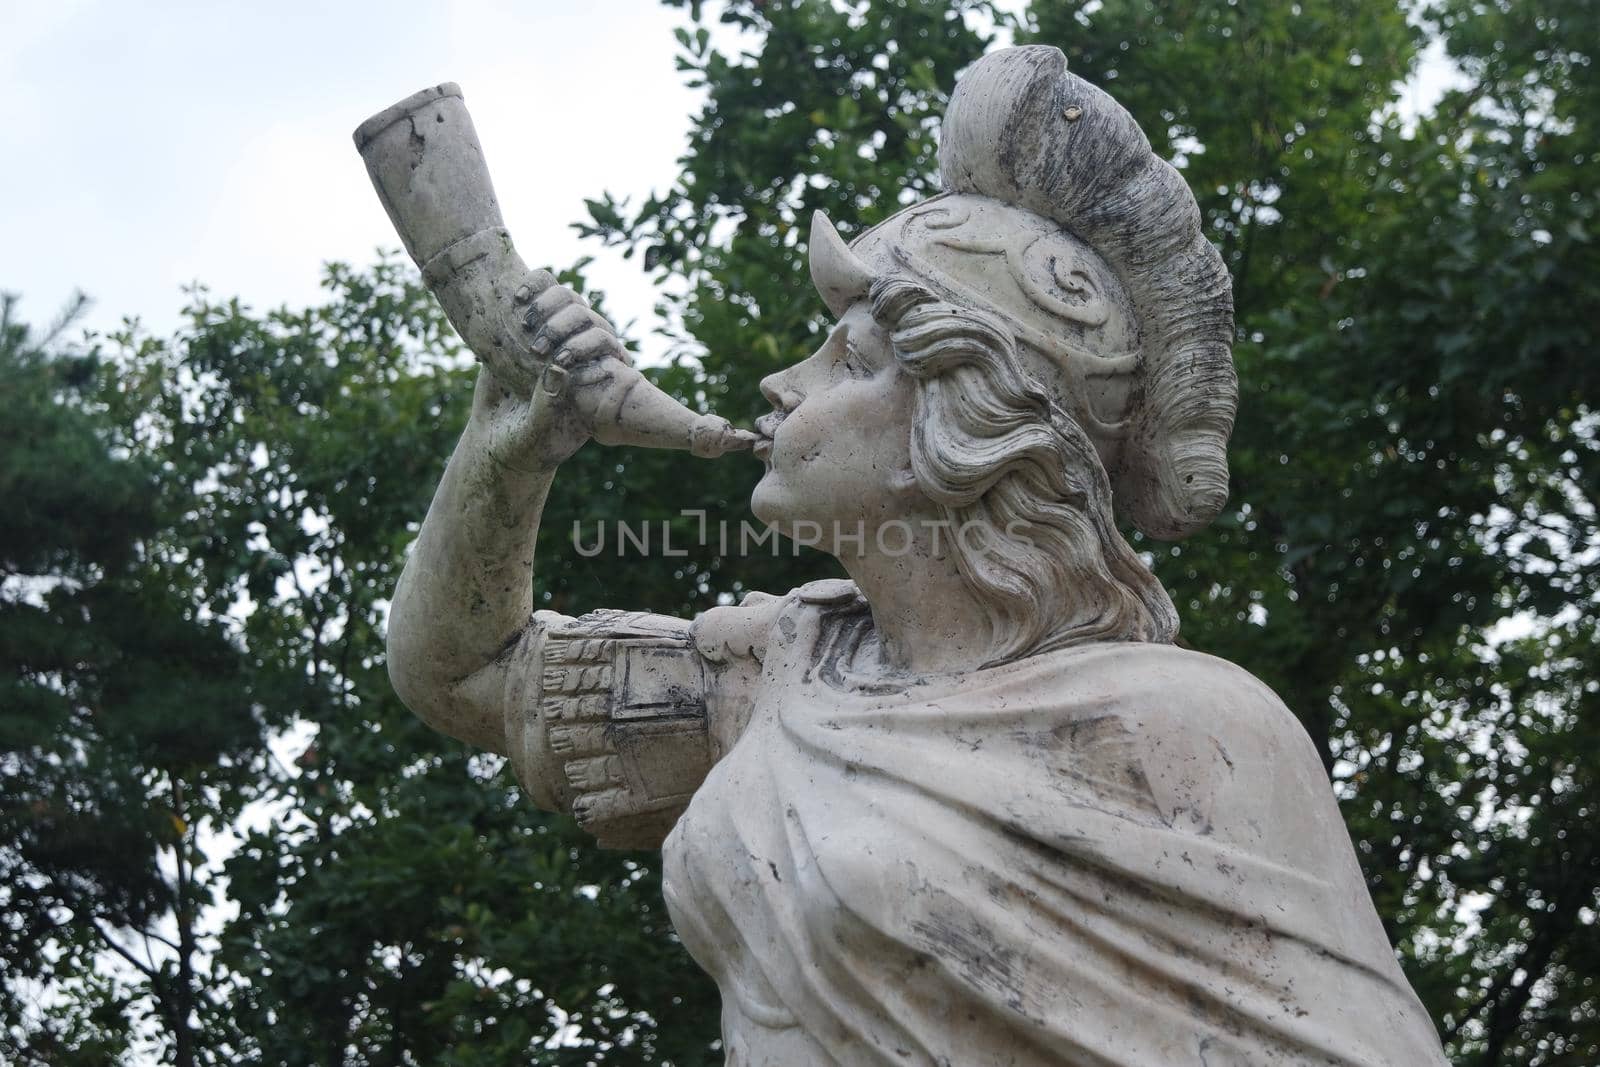 CHUNCHEON, SOUTH KOREA- October-03, 2020: sculpture of classical water god blowing conch shell - ancient natural trumpet. Stone sculpture of a Triton, blowing on his conch shell trumpet.